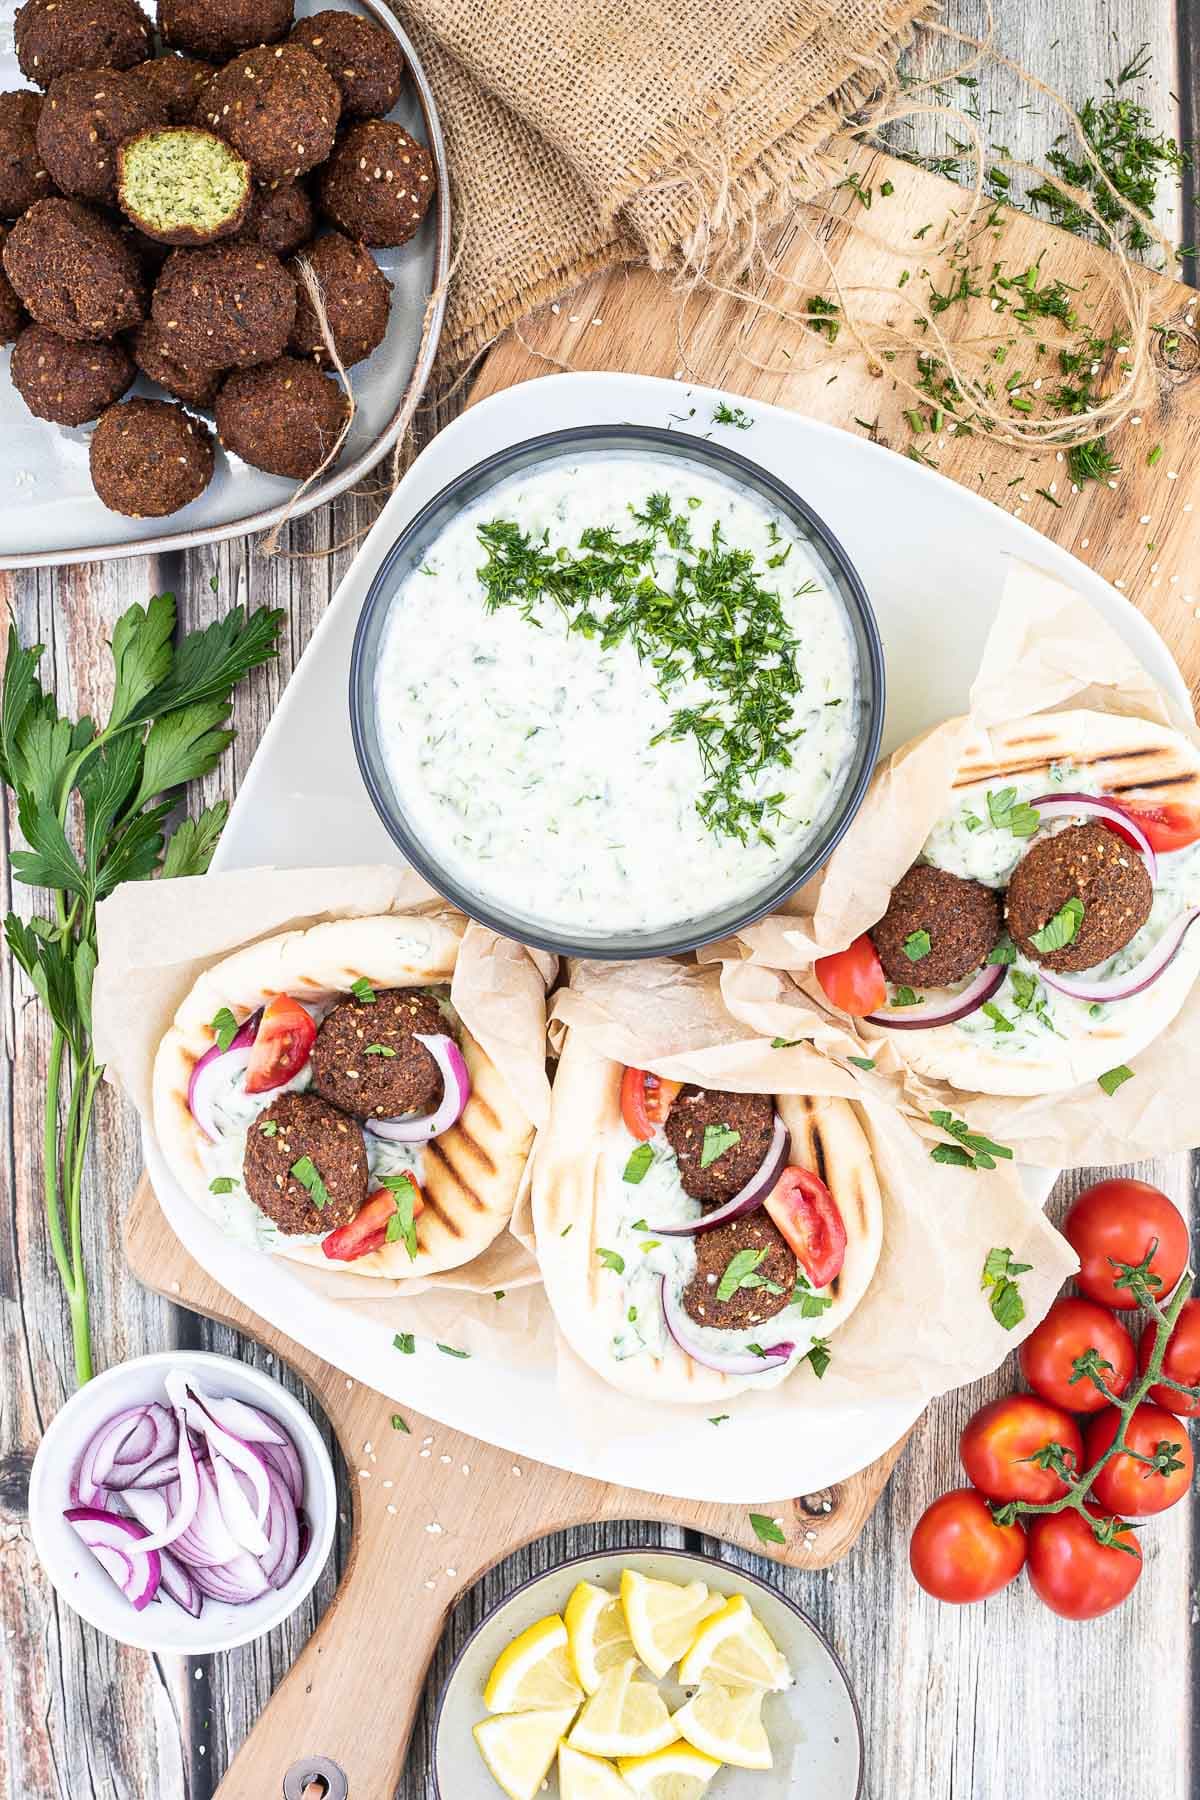 3 pitas folded and stuffed with 2 brown falafel balls, white grated cucumber salad, tomato and purple onion slices. A black bowl of white grated cucumber sauce is placed next to them. Leftover ingredients are placed in balls and on plates around it.